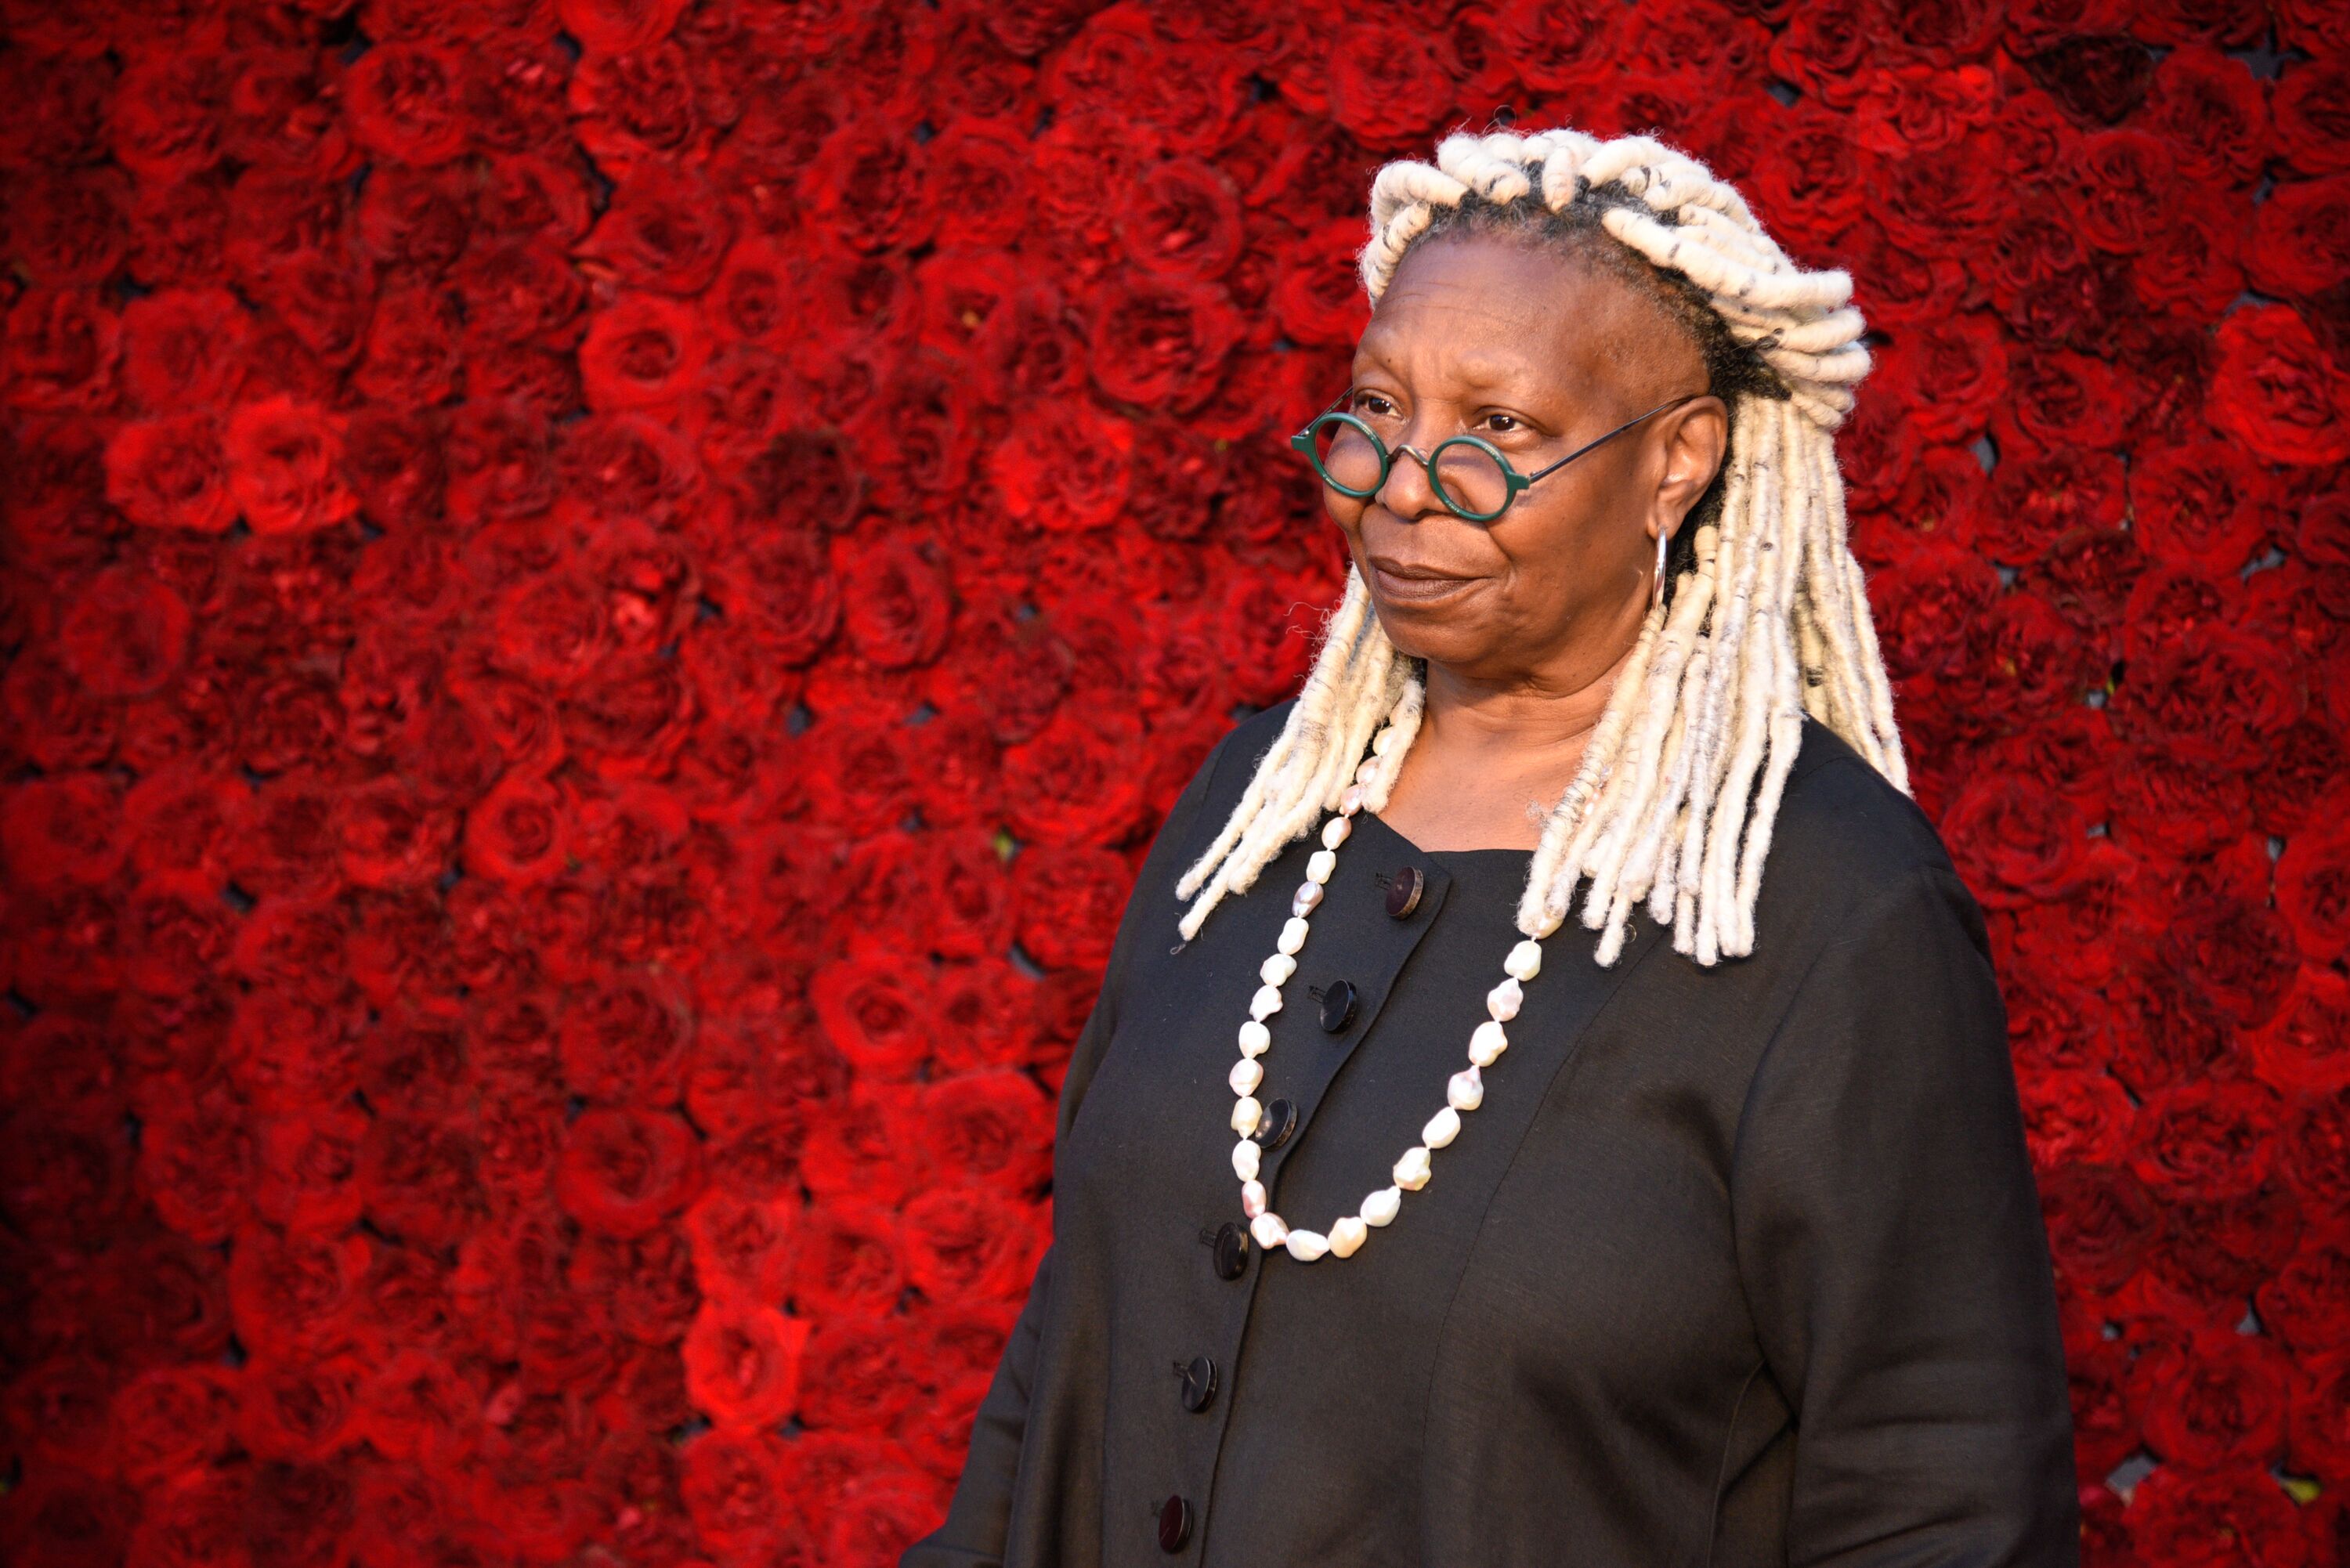 Whoopi Goldberg at the Gala opening of Tyler Perry Studios in Atlanta in 2019 | Source: Getty Images